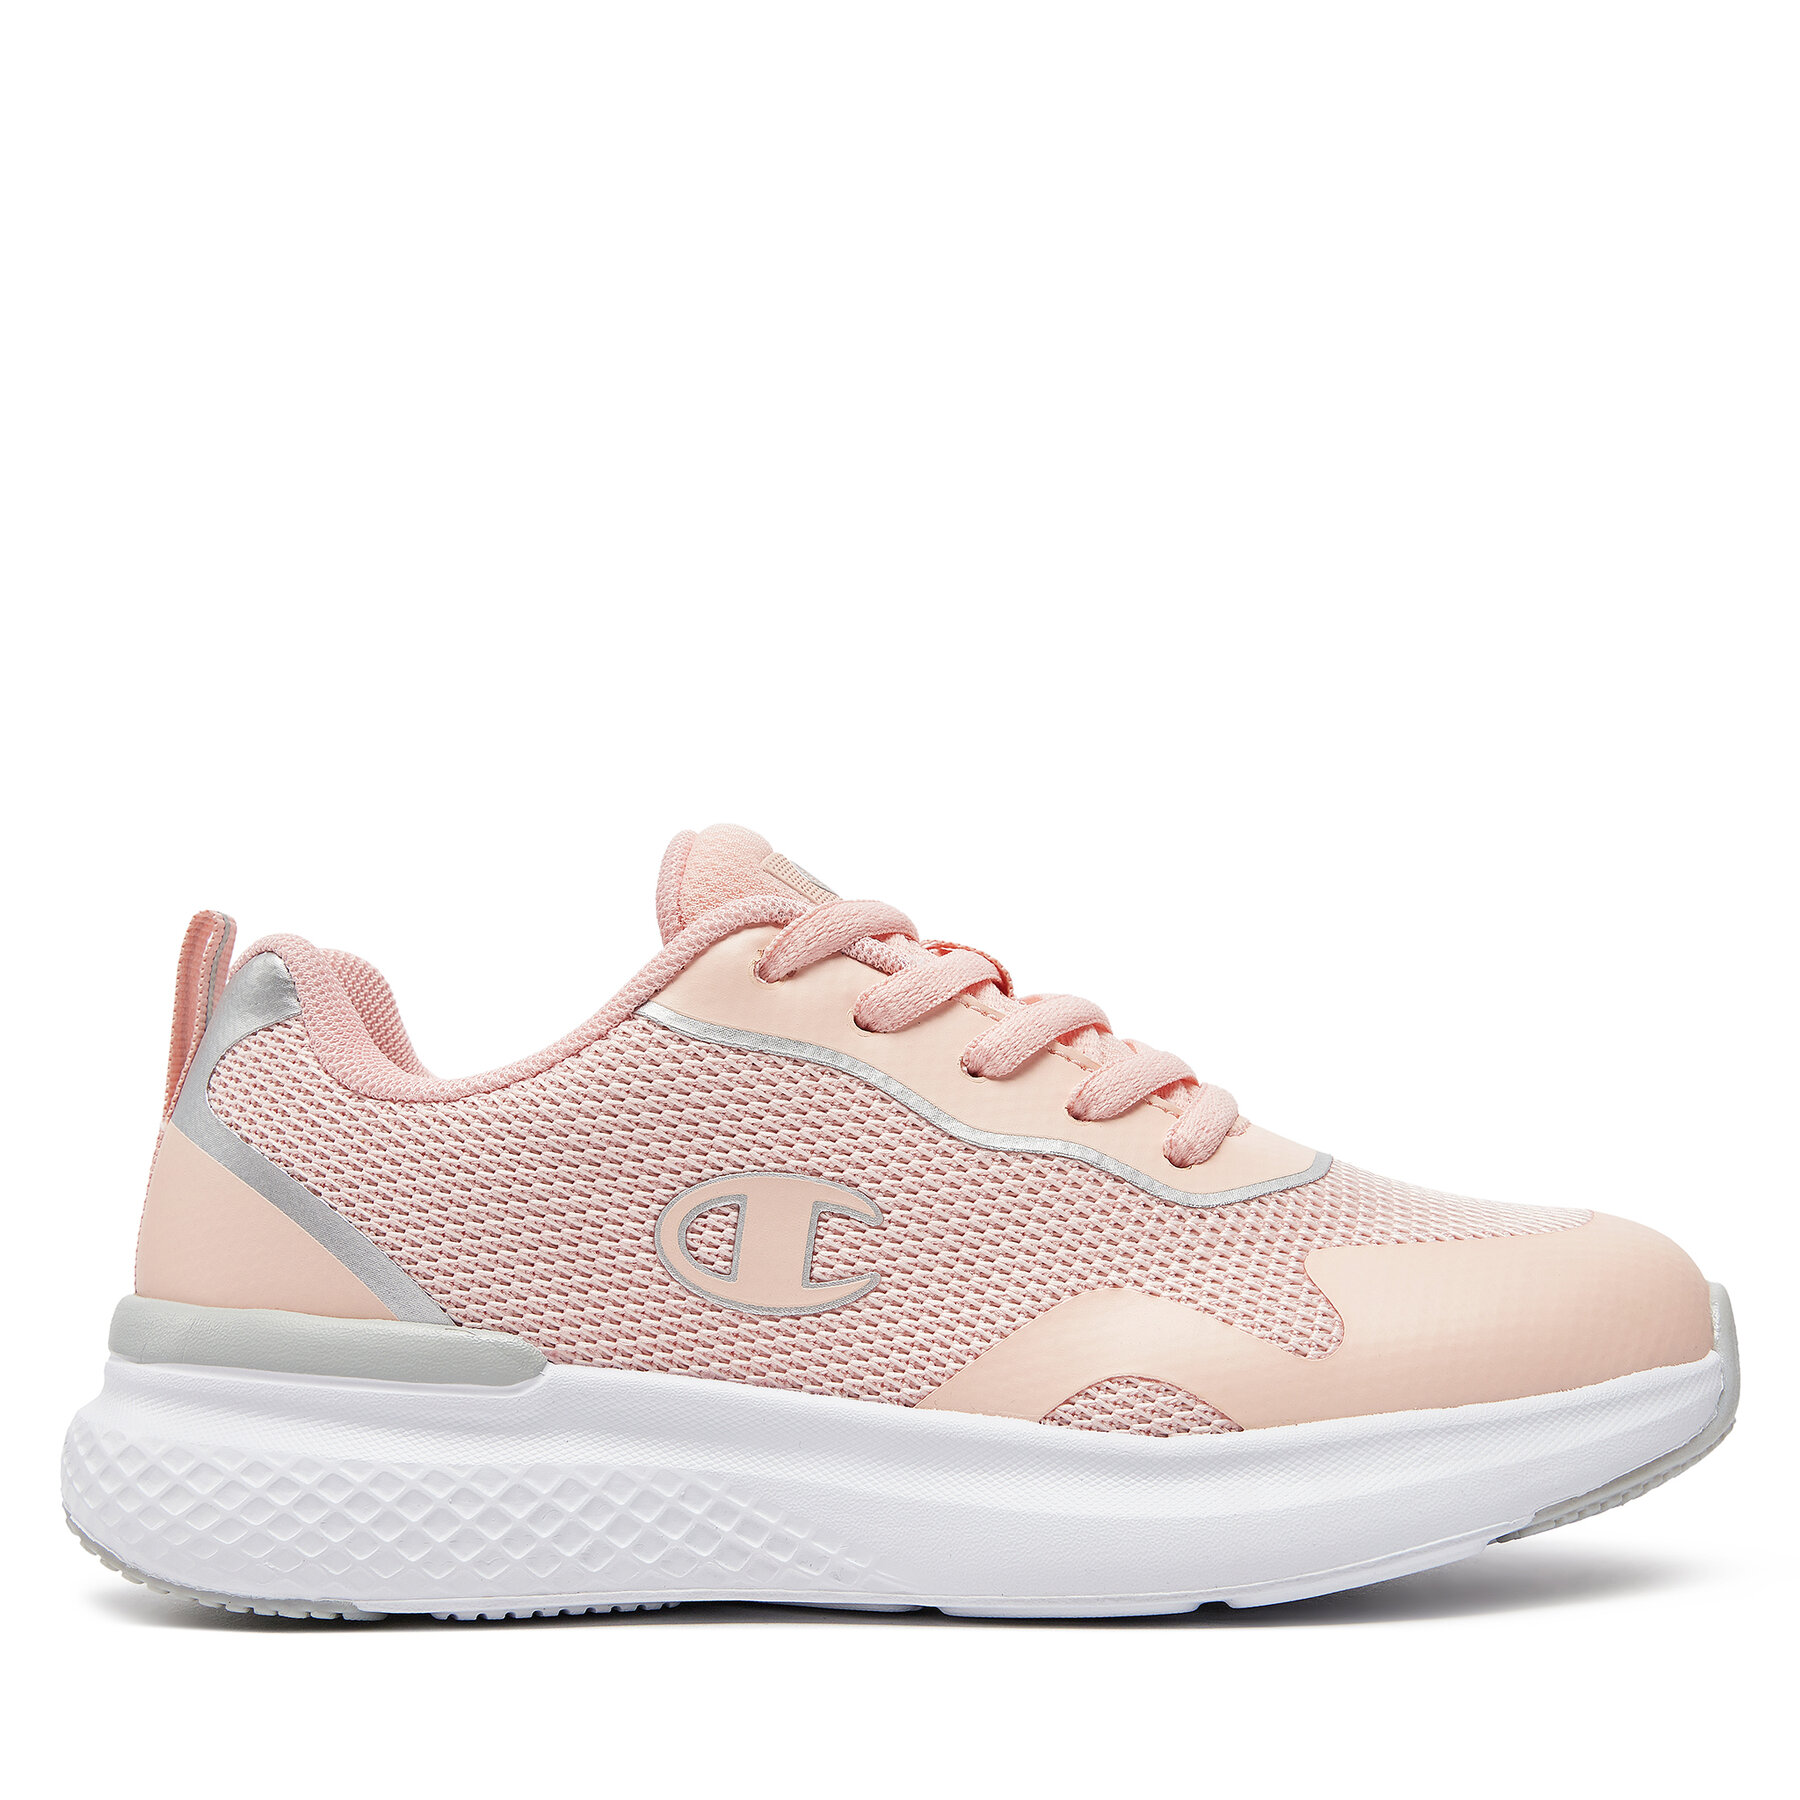 Sneakers Champion Bold 3 G Gs Low Cut Shoe S32871-CHA-PS127 Dusty Rose/Silver von Champion